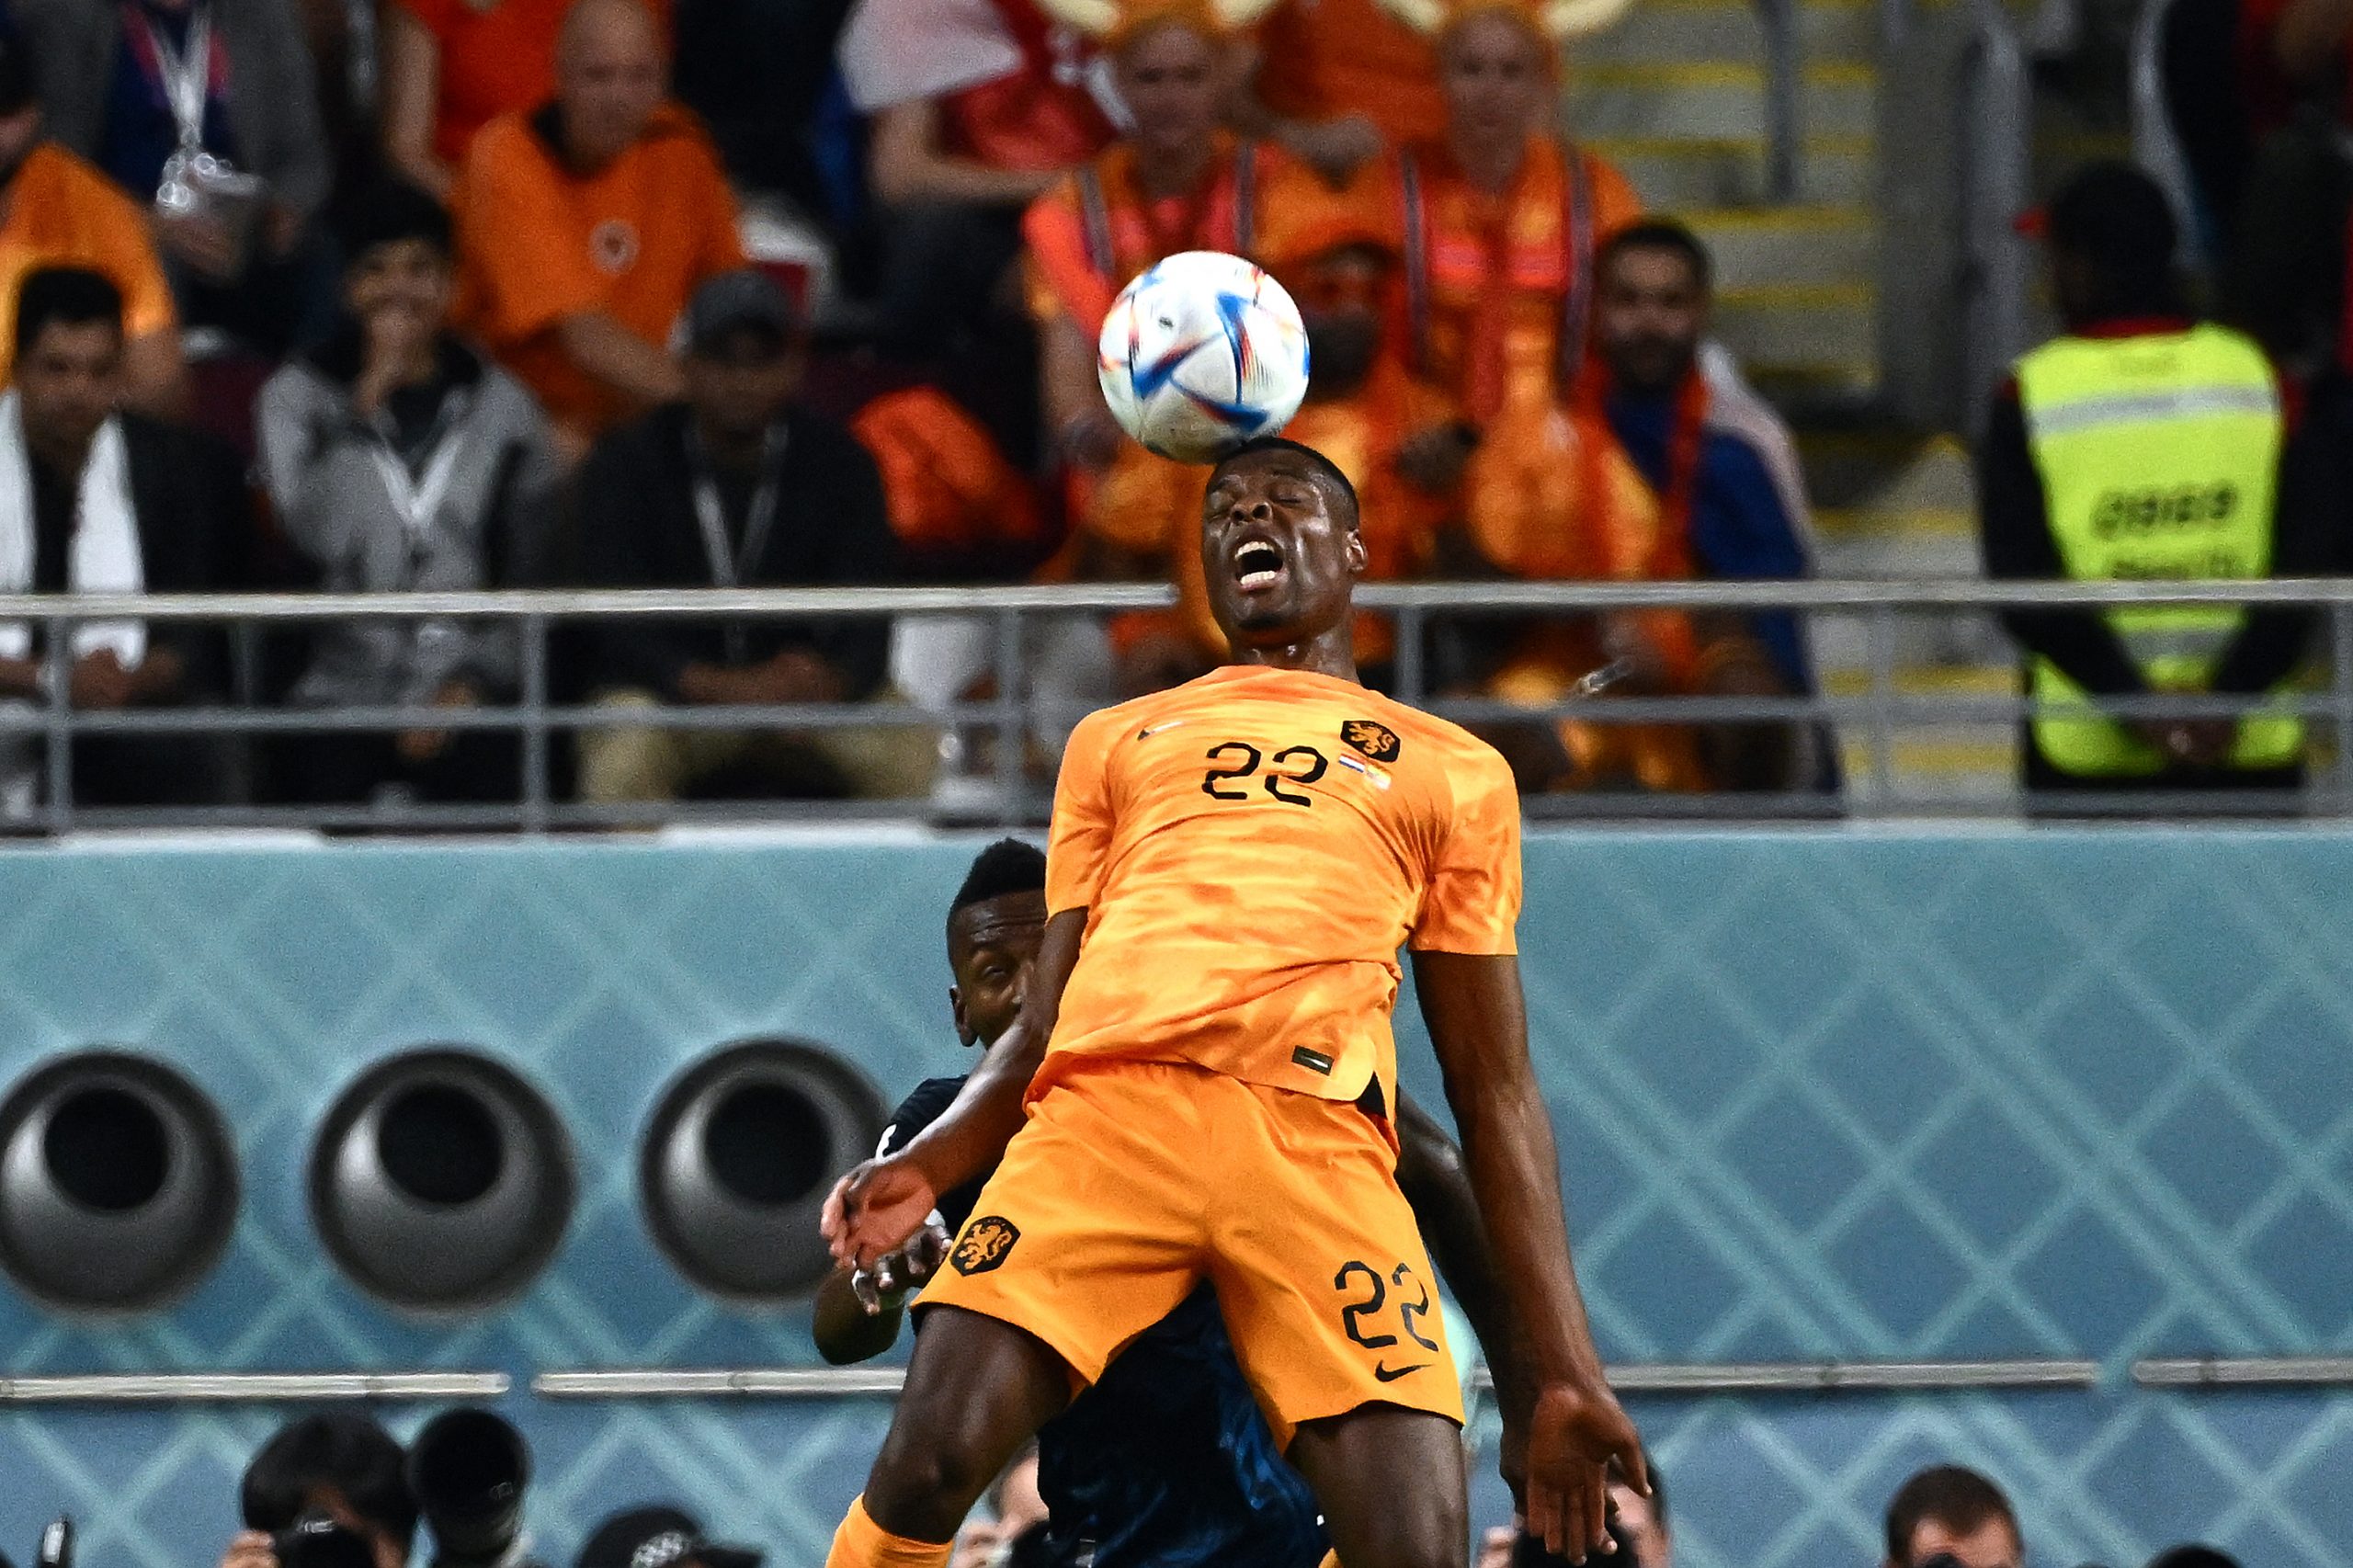 Netherlands' defender Denzel Dumfries heads the ball during the Qatar 2022 World Cup Group A football match between the Netherlands and Ecuador at the Khalifa International Stadium in Doha on November 25, 2022